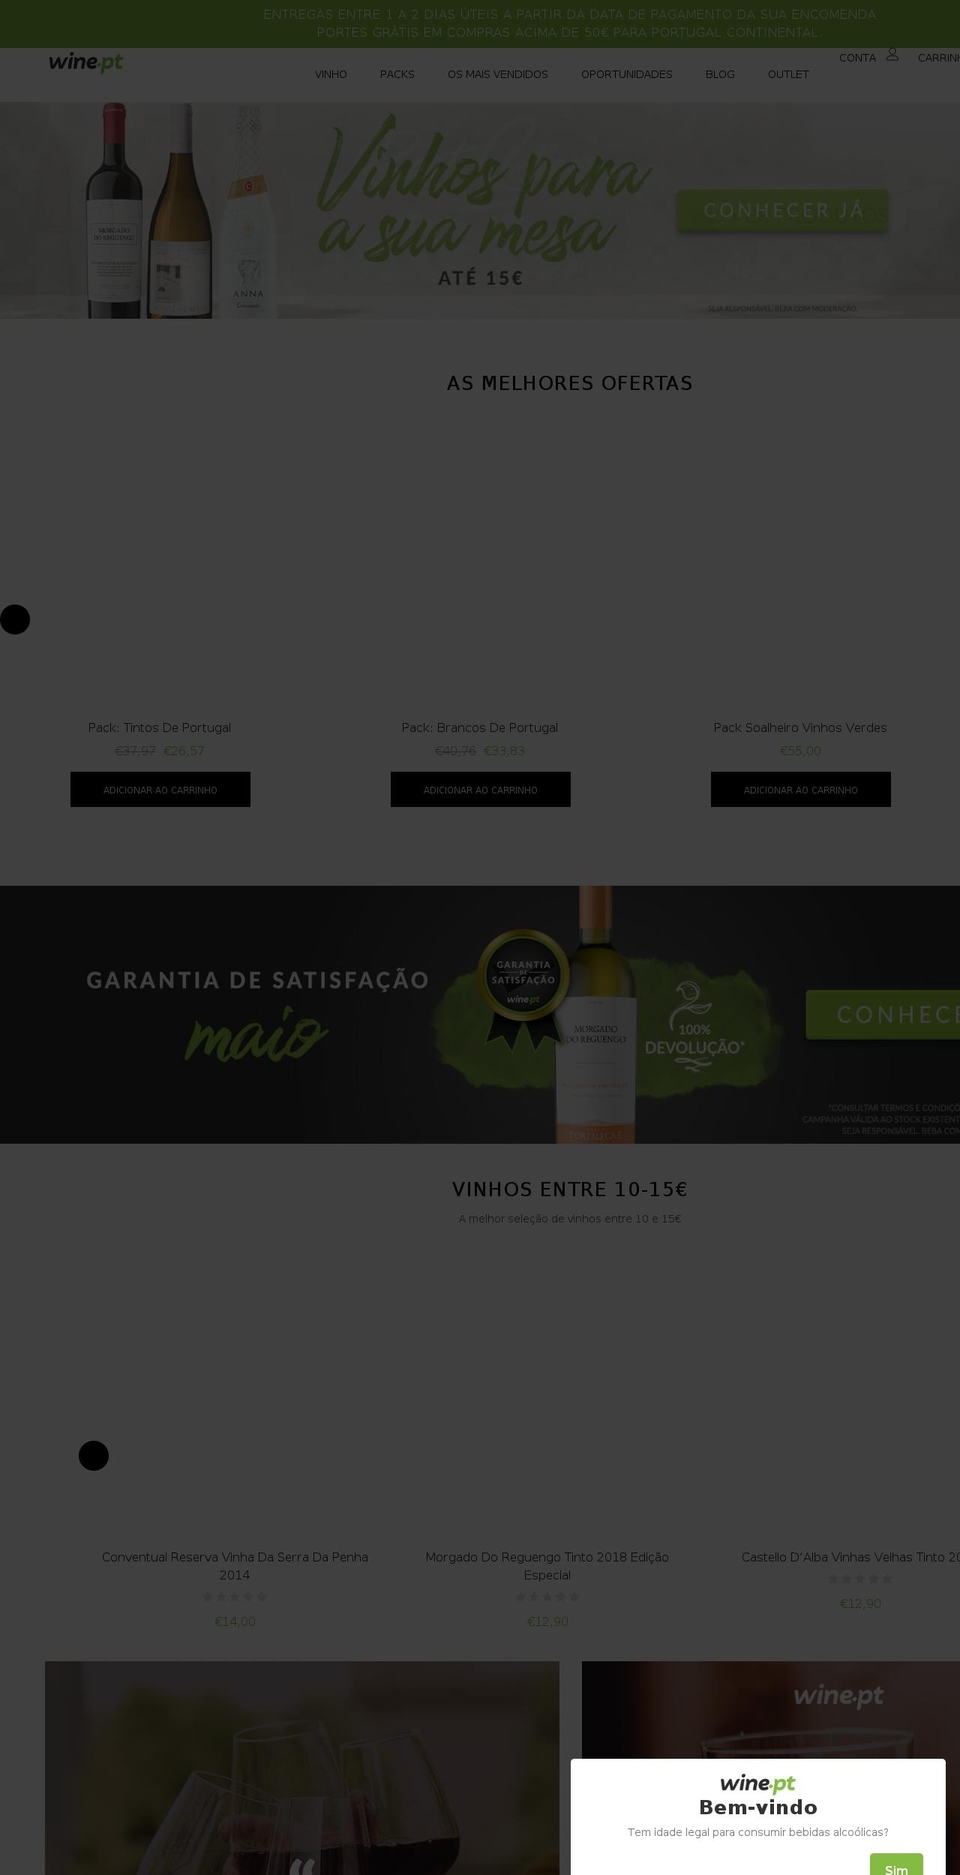 WATCHES Shopify theme site example wine.pt